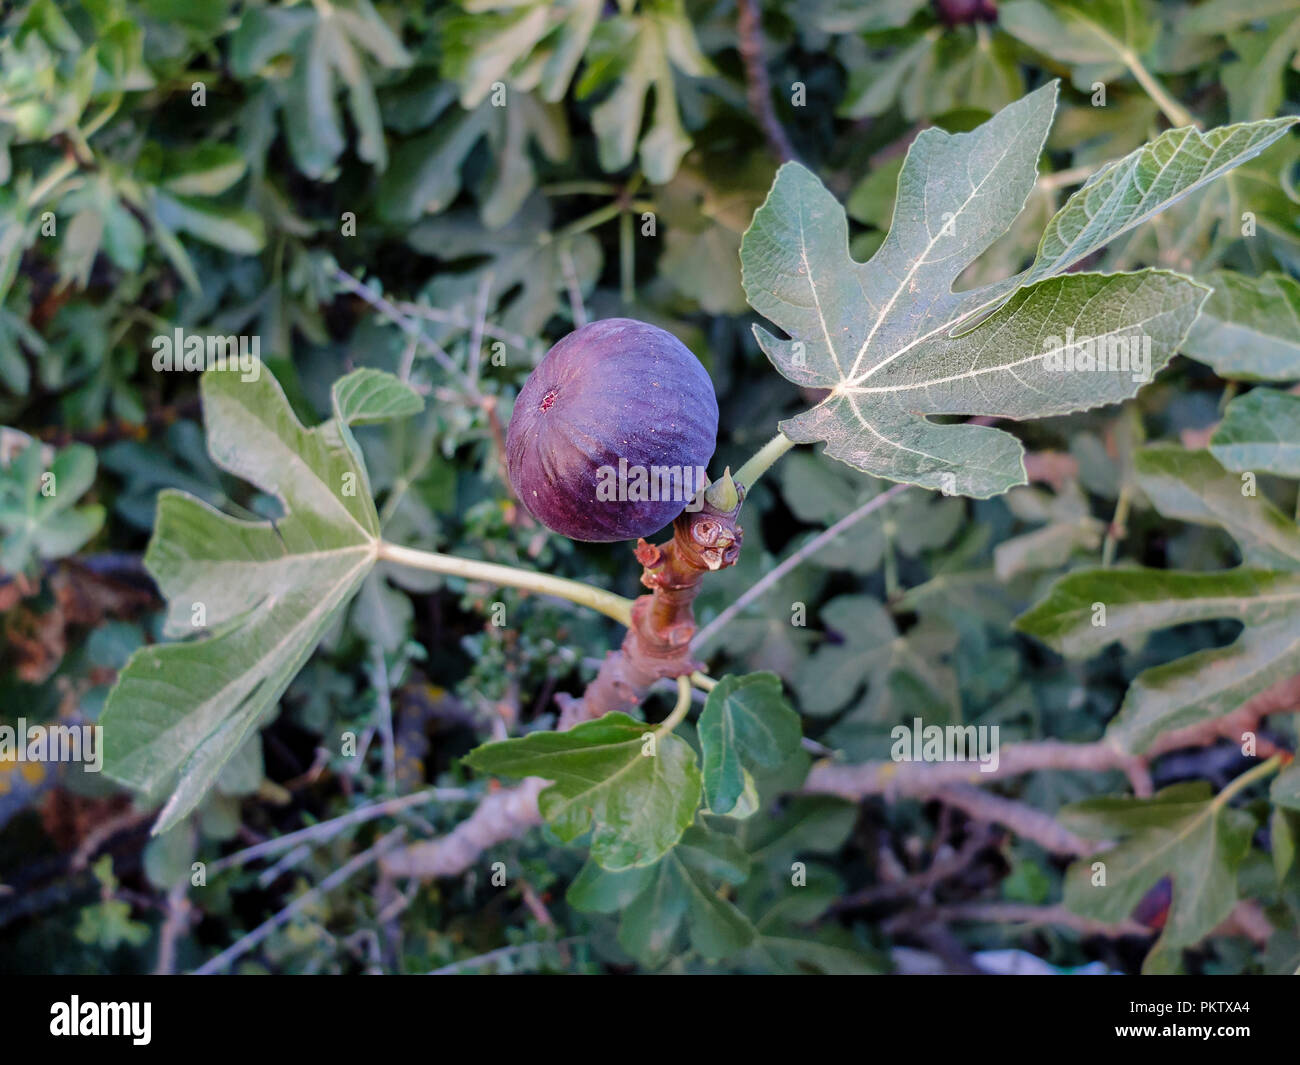 Violet black fig fruit on its tree between two green leaves Stock Photo